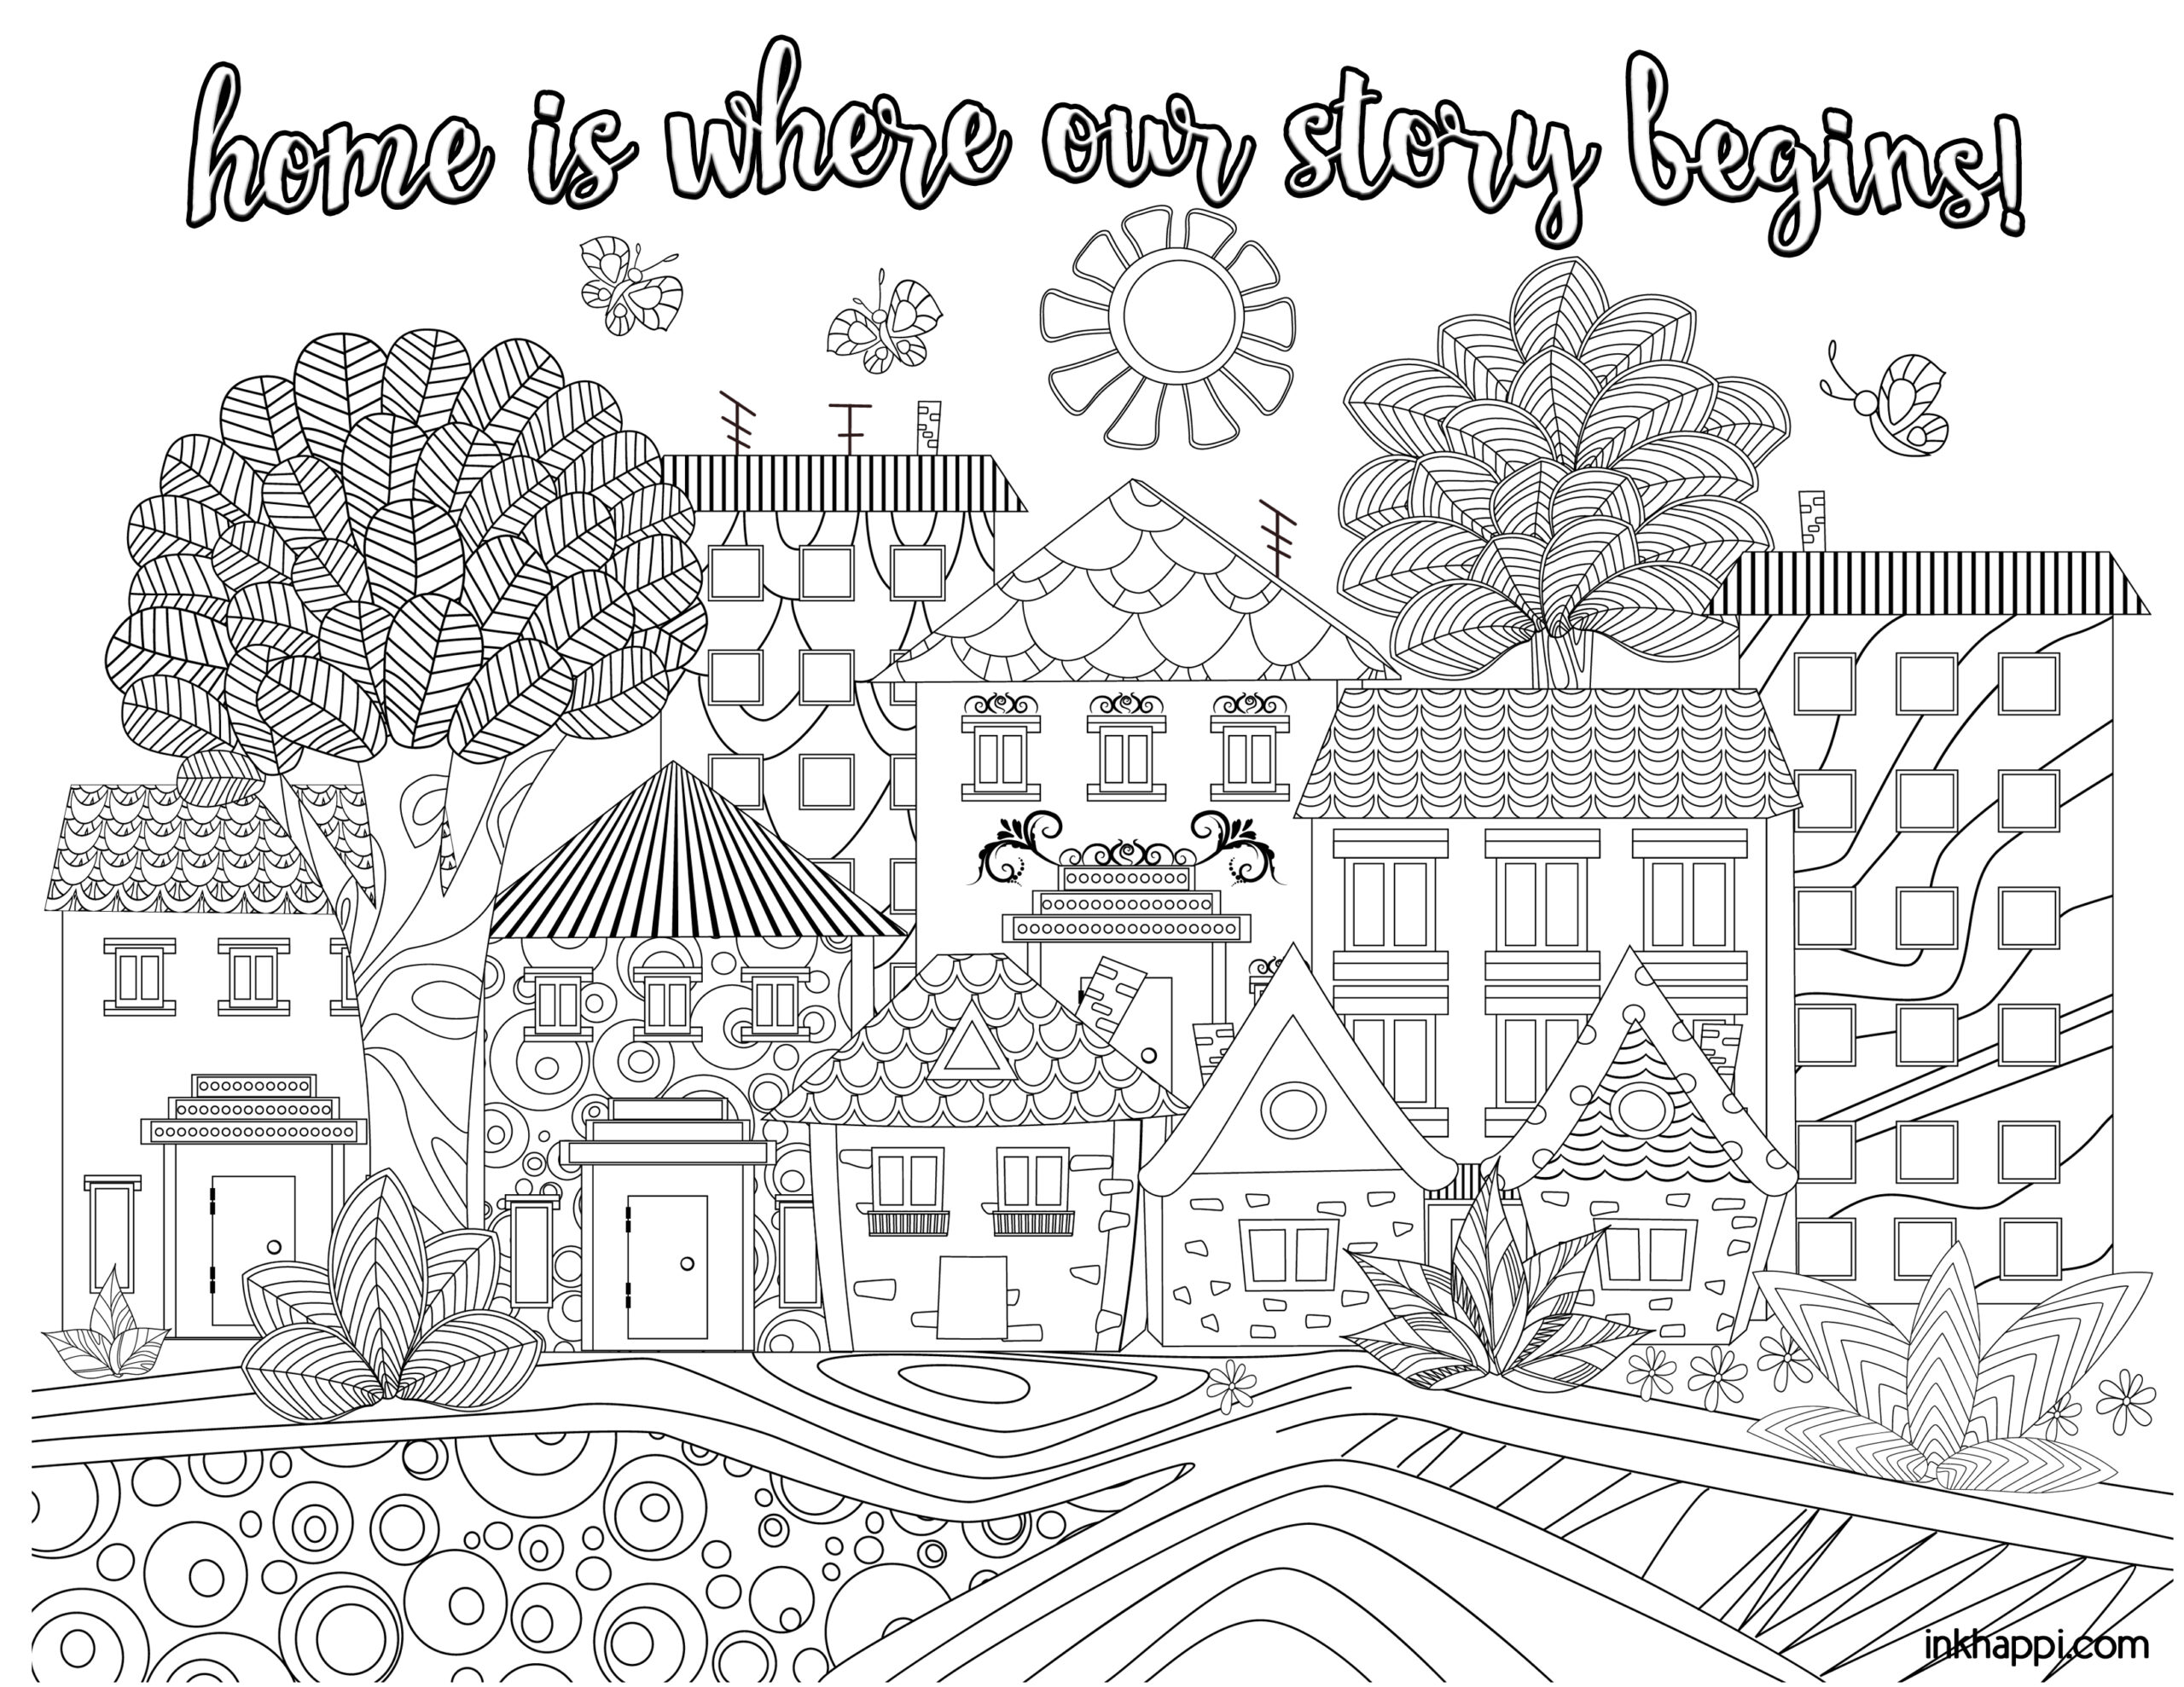 Home & Family Coloring Pages. Relax and Enjoy! - inkhappi